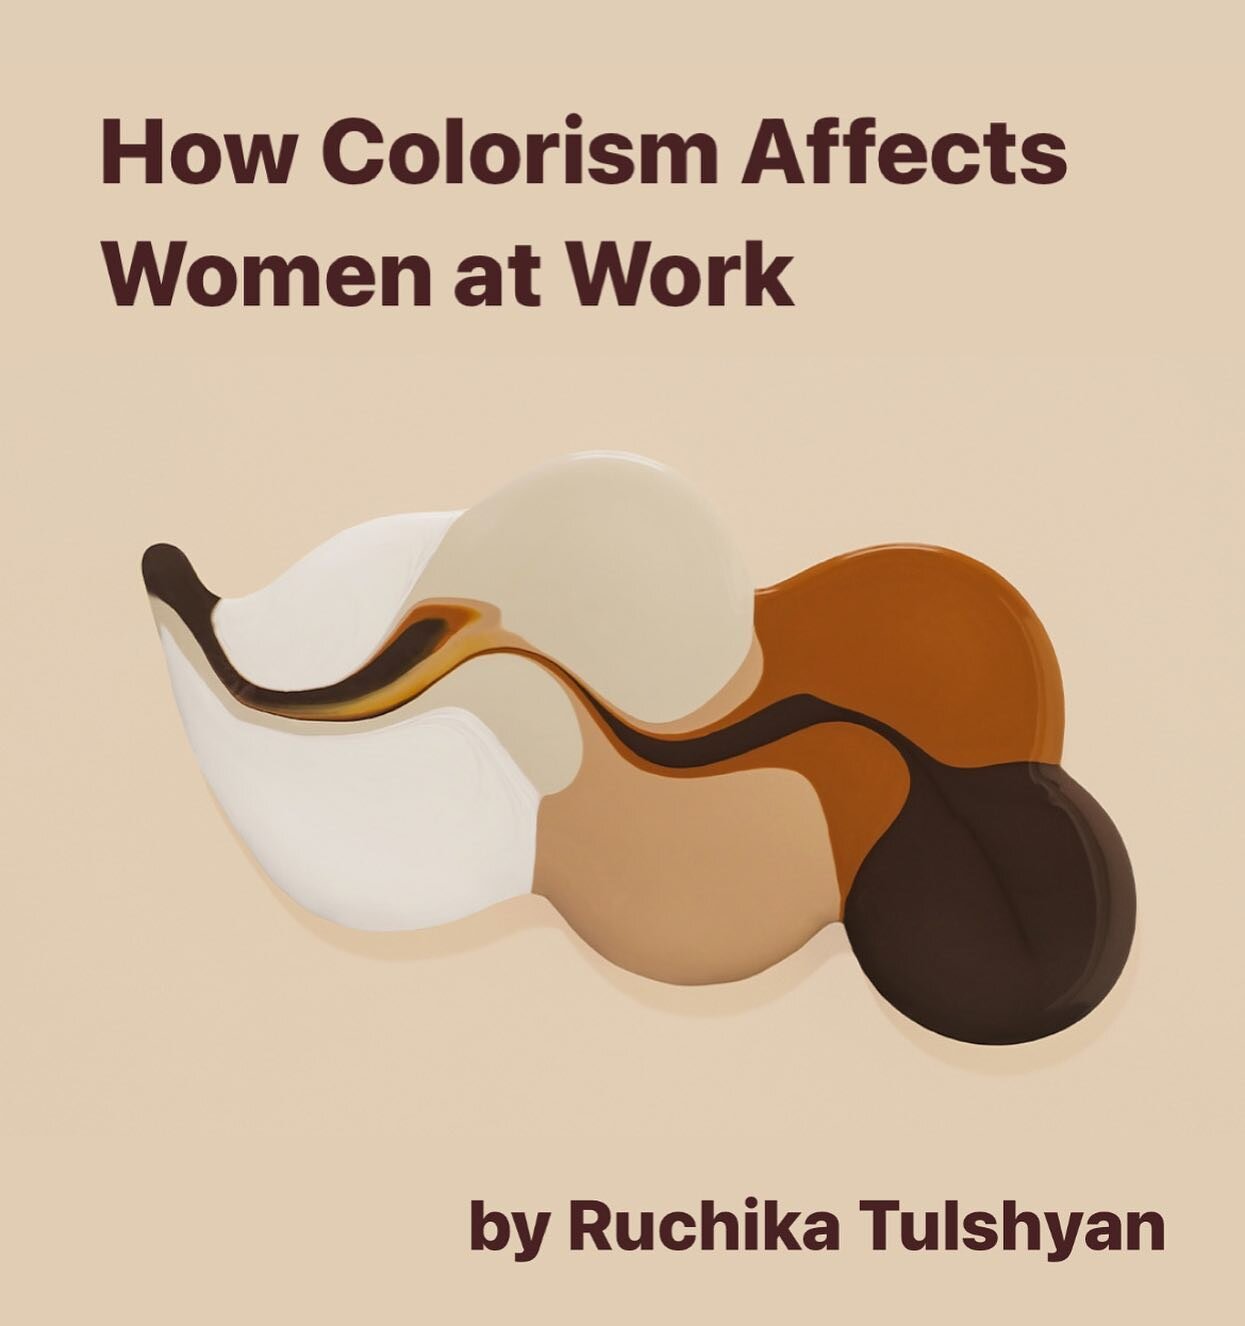 Yes, let&rsquo;s talk about colorism. 

In a brilliant essay published by @harvard_business_review, Ruchika Tulshyan explores the layered complexities of this age-old bias&mdash; focusing specifically on how colorism impacts women in the workplace. 
